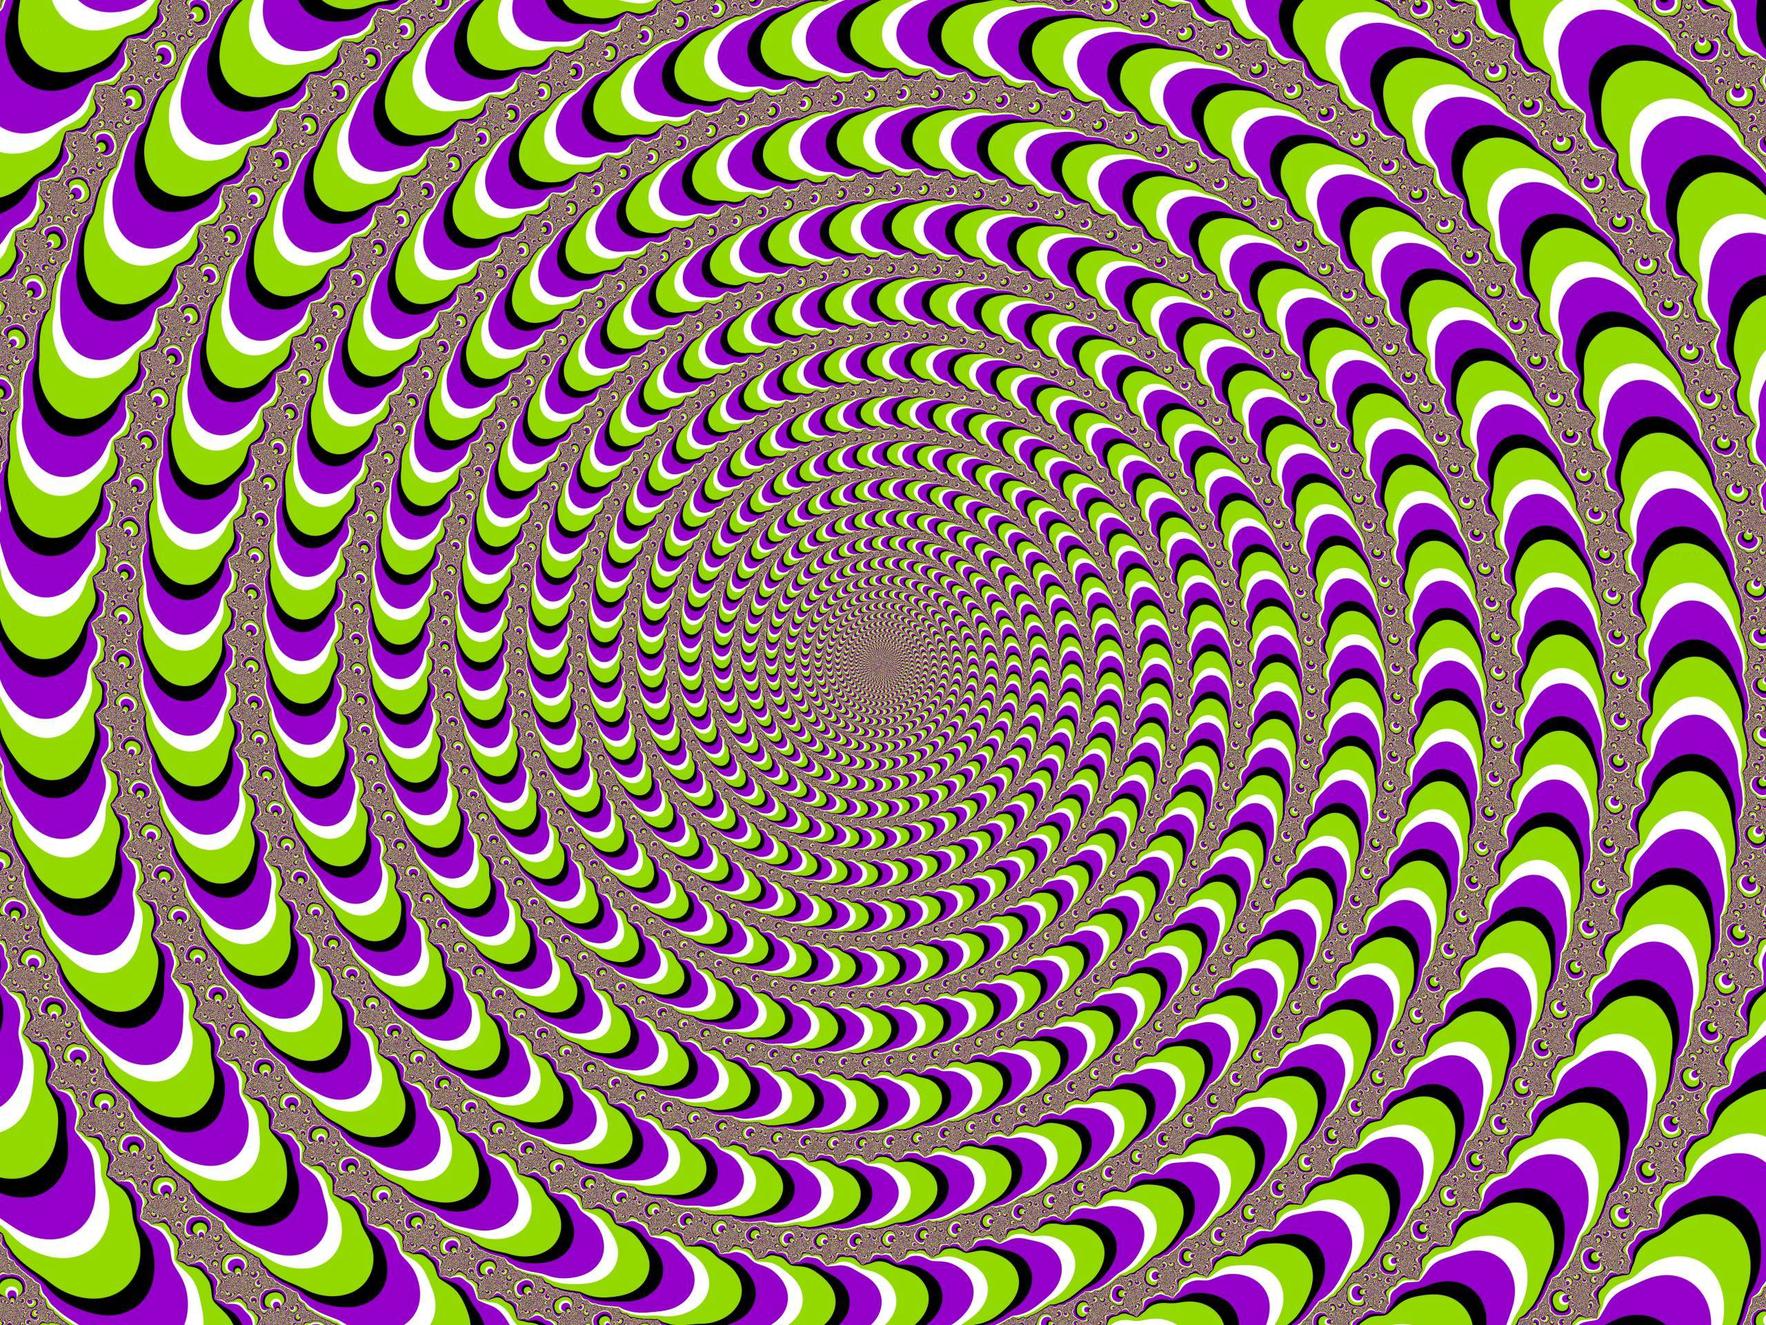 Displaying Image For Moving Optical Illusions Brain Teasers